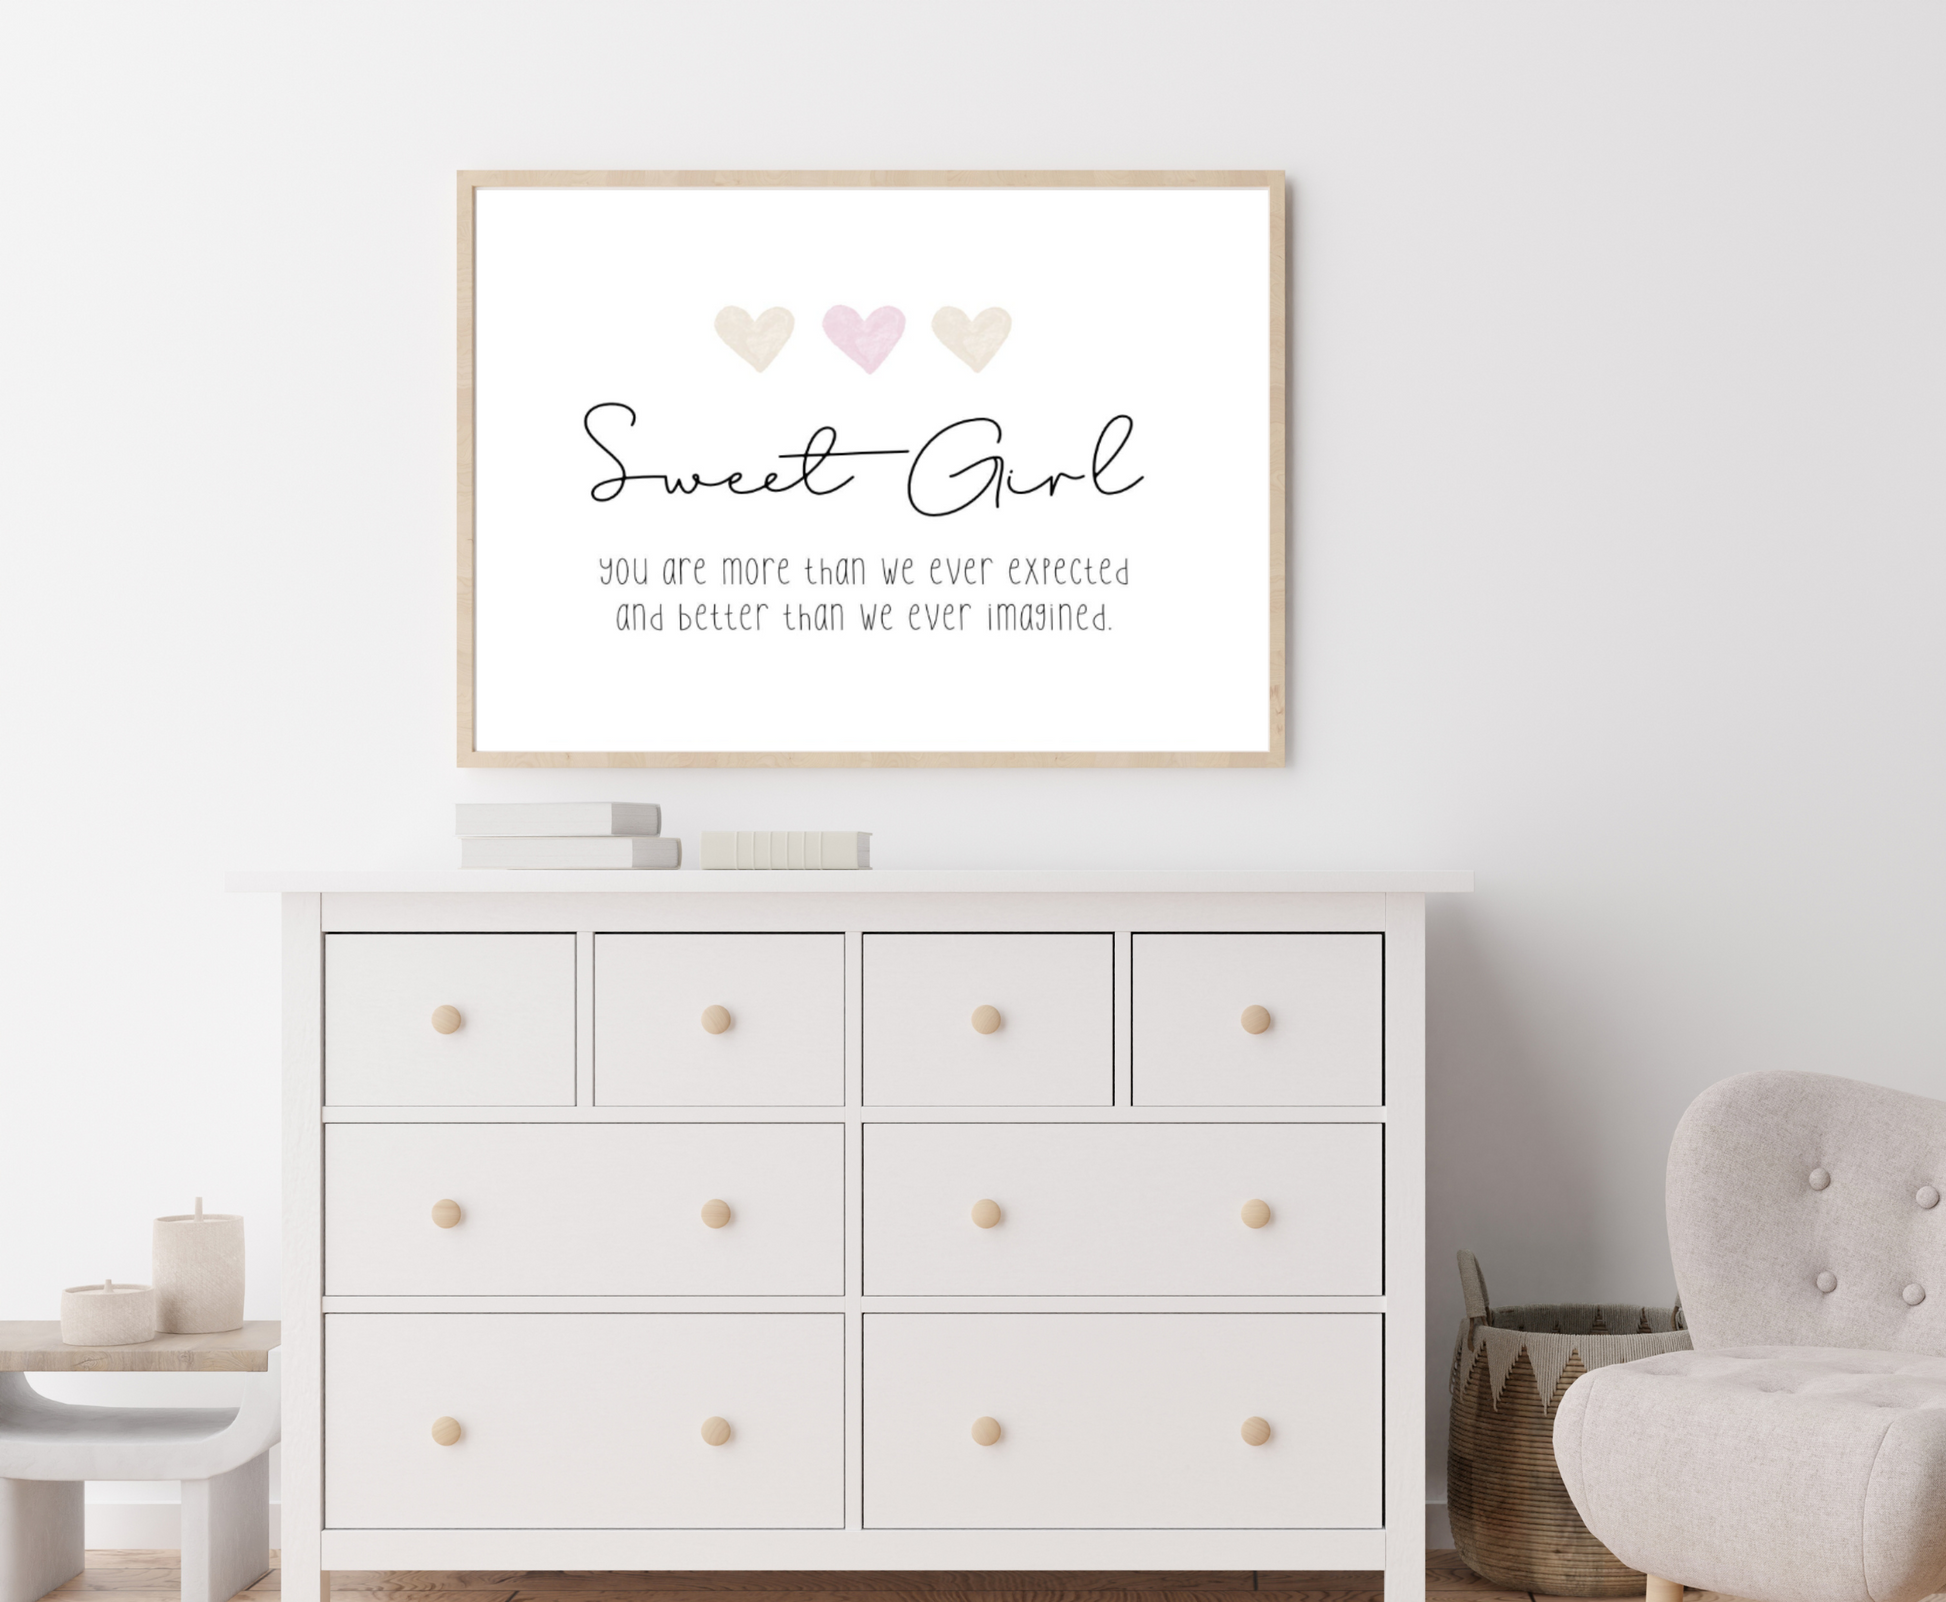 A picture showing a white dresser with a little girl’s graphic hanging on the wall right above the latter. The graphic is showing three pink and beige hearts with a piece of writing below that says: Sweet girl you are more than we ever expected, and better than we ever imagined.